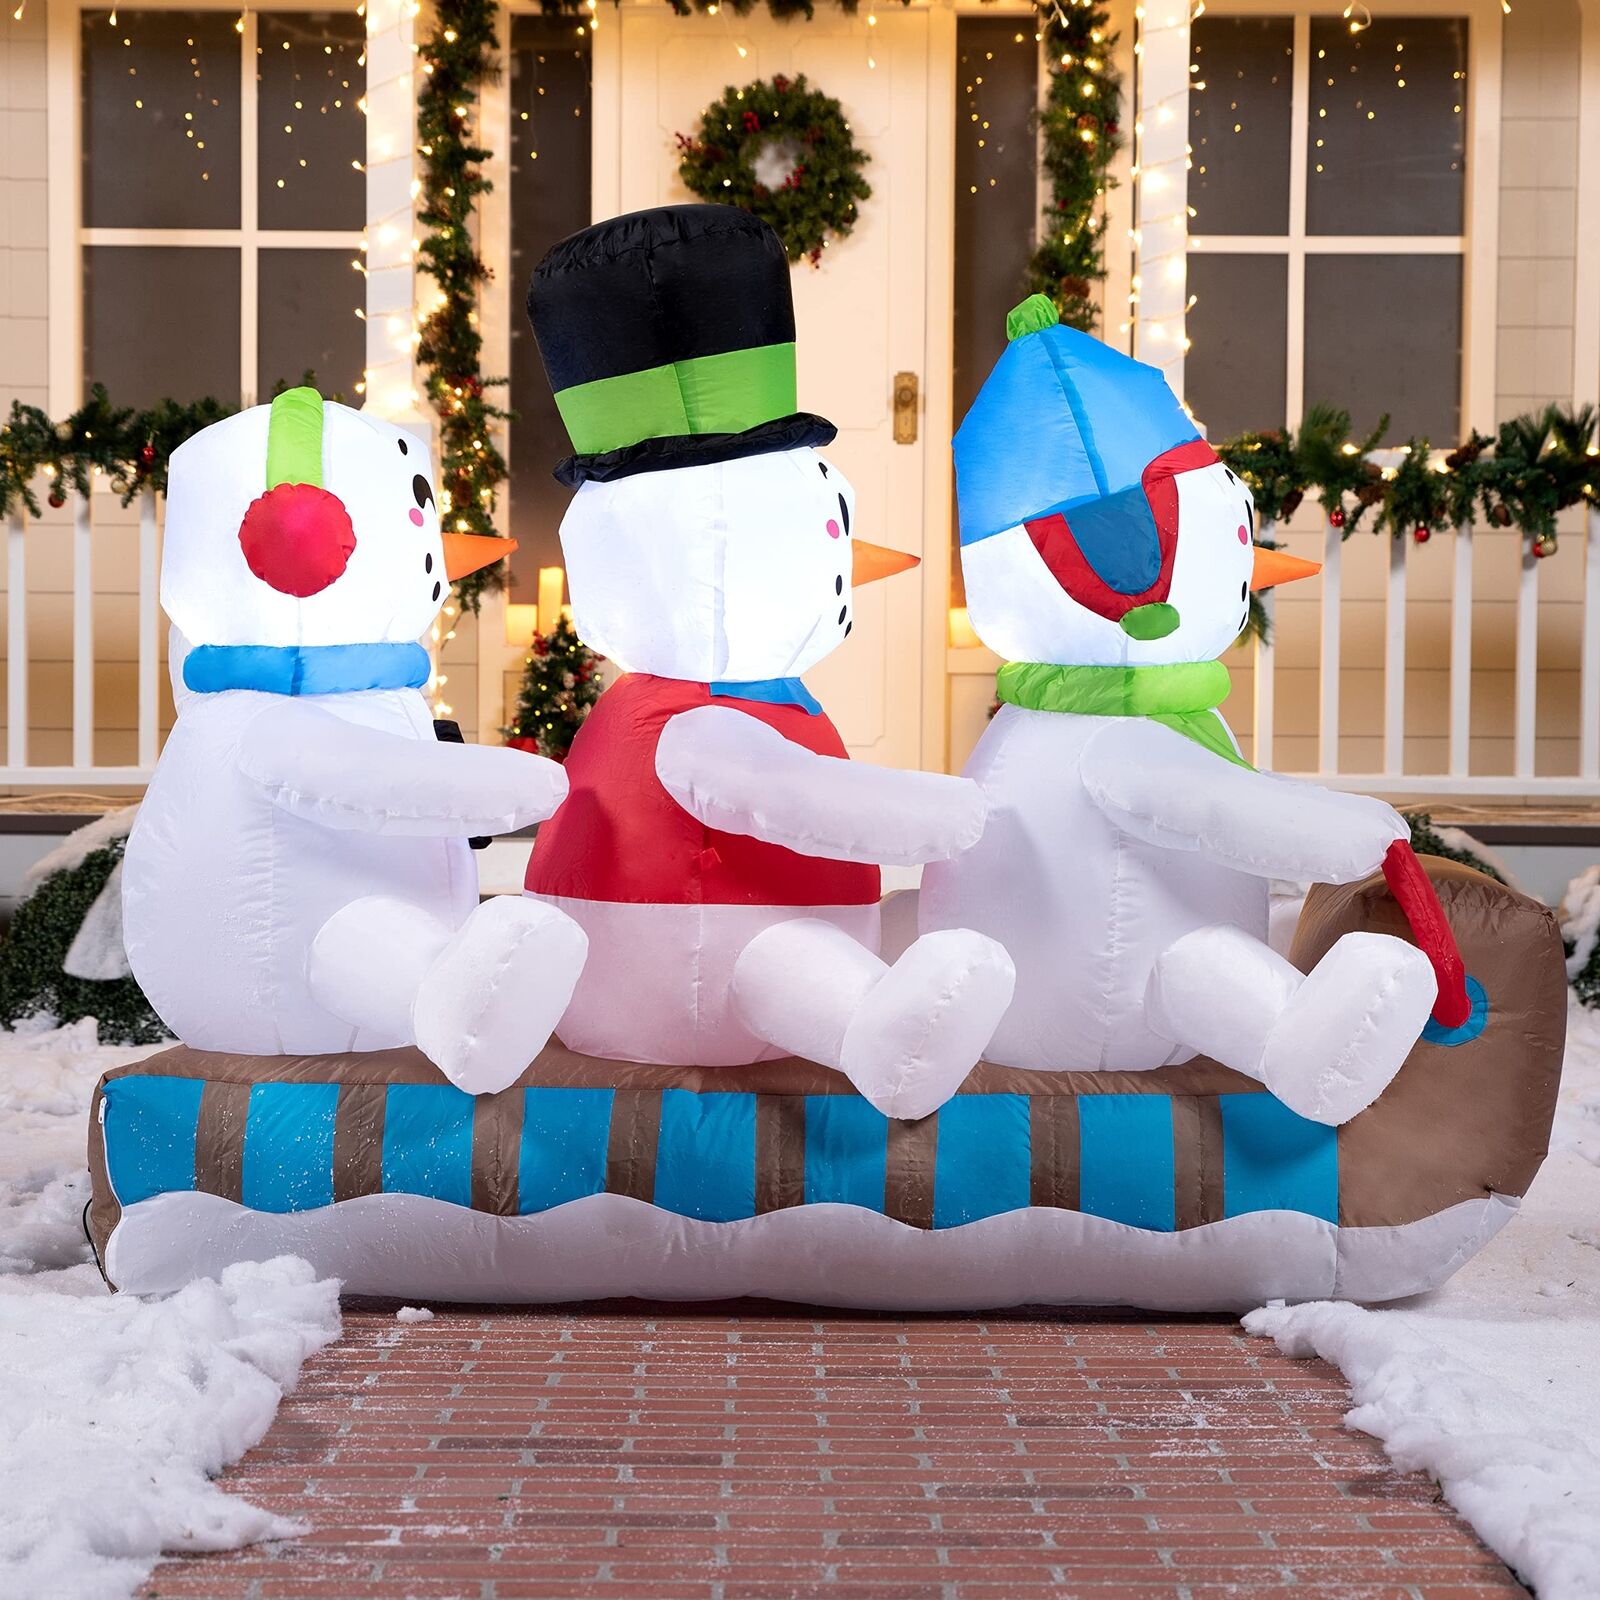 6 FT Long Christmas Inflatable Snowman with Build-in LEDs for Christmas